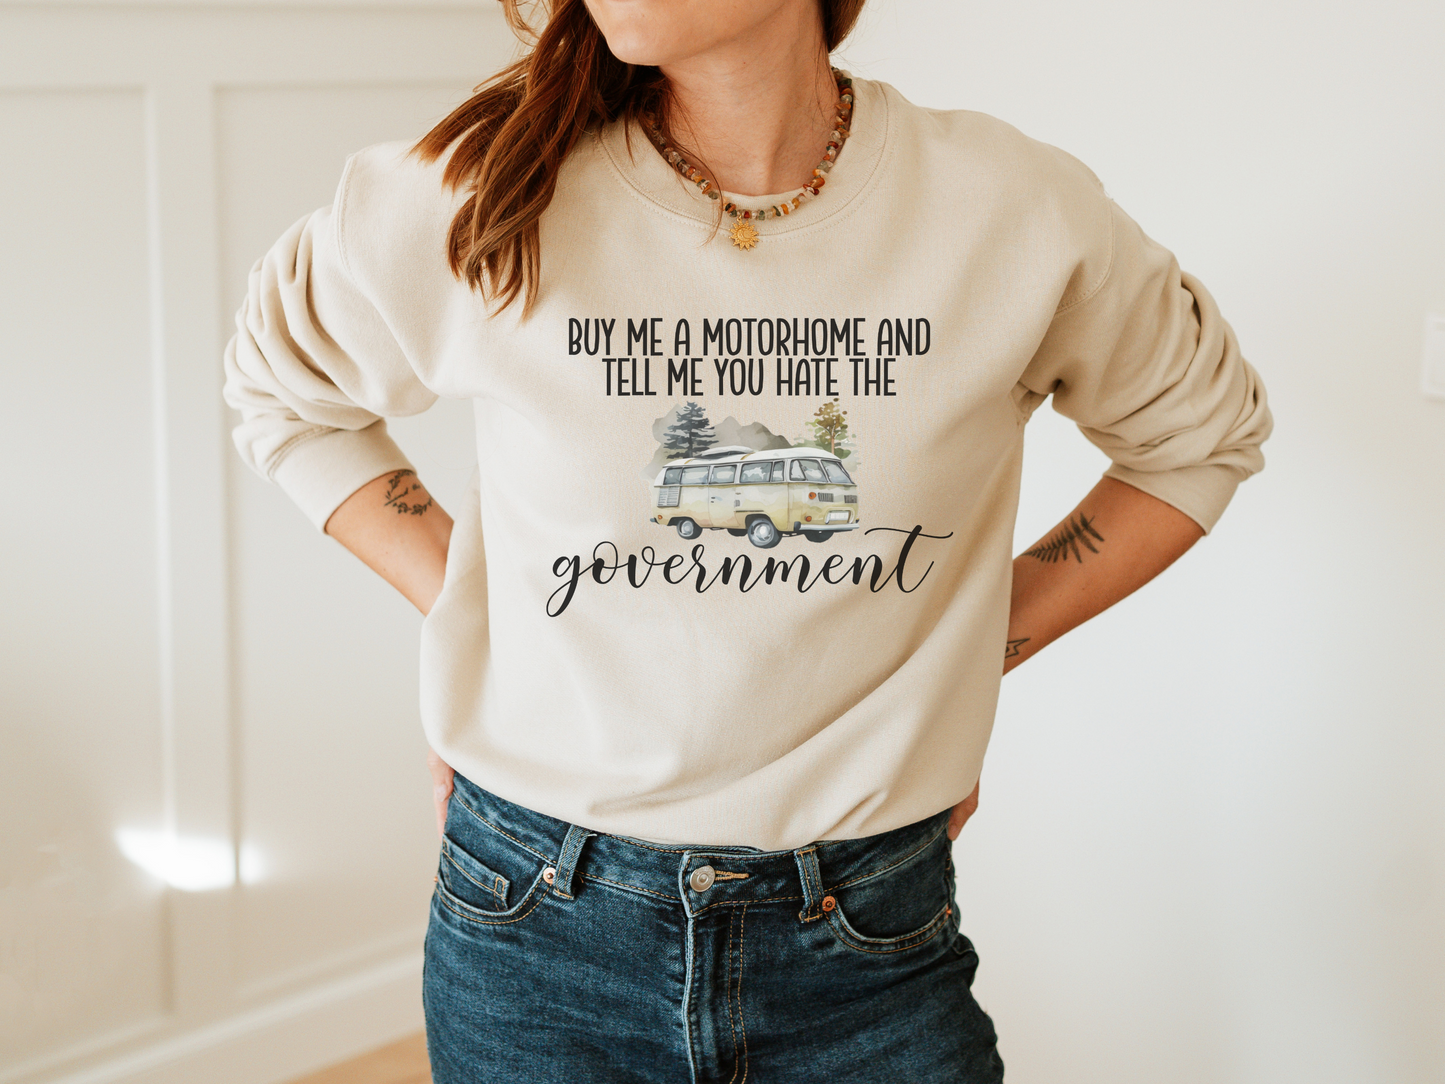 Buy Me A Motorhome and Tell Me You Hate The Government Shirt